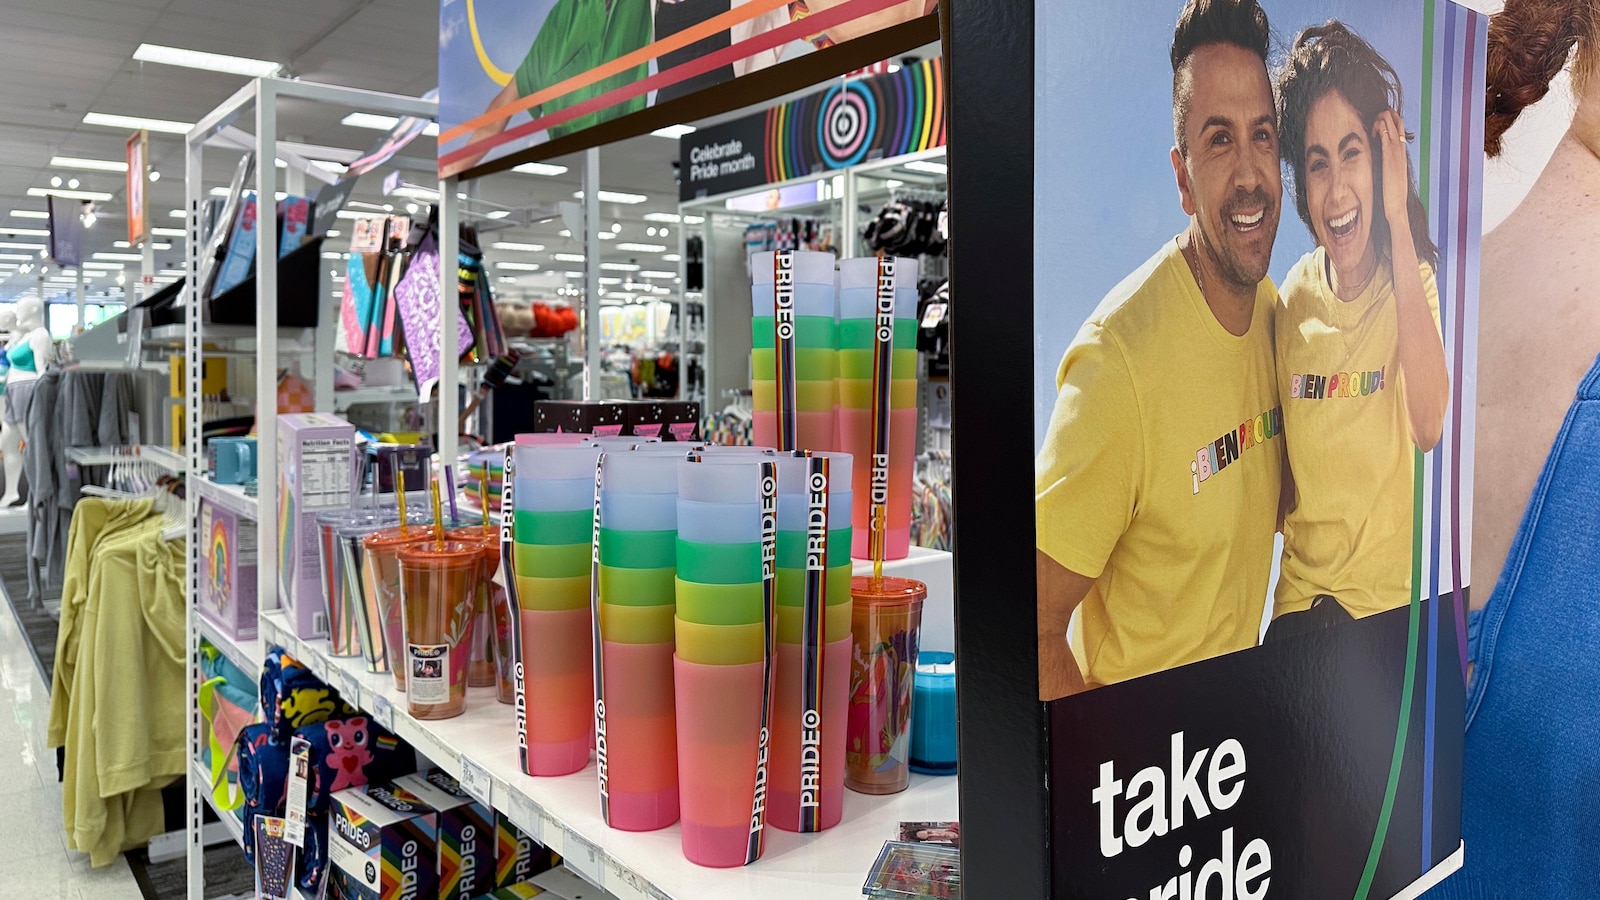 Aim to reduce the number of stores selling Pride-themed merchandise after last year's setback